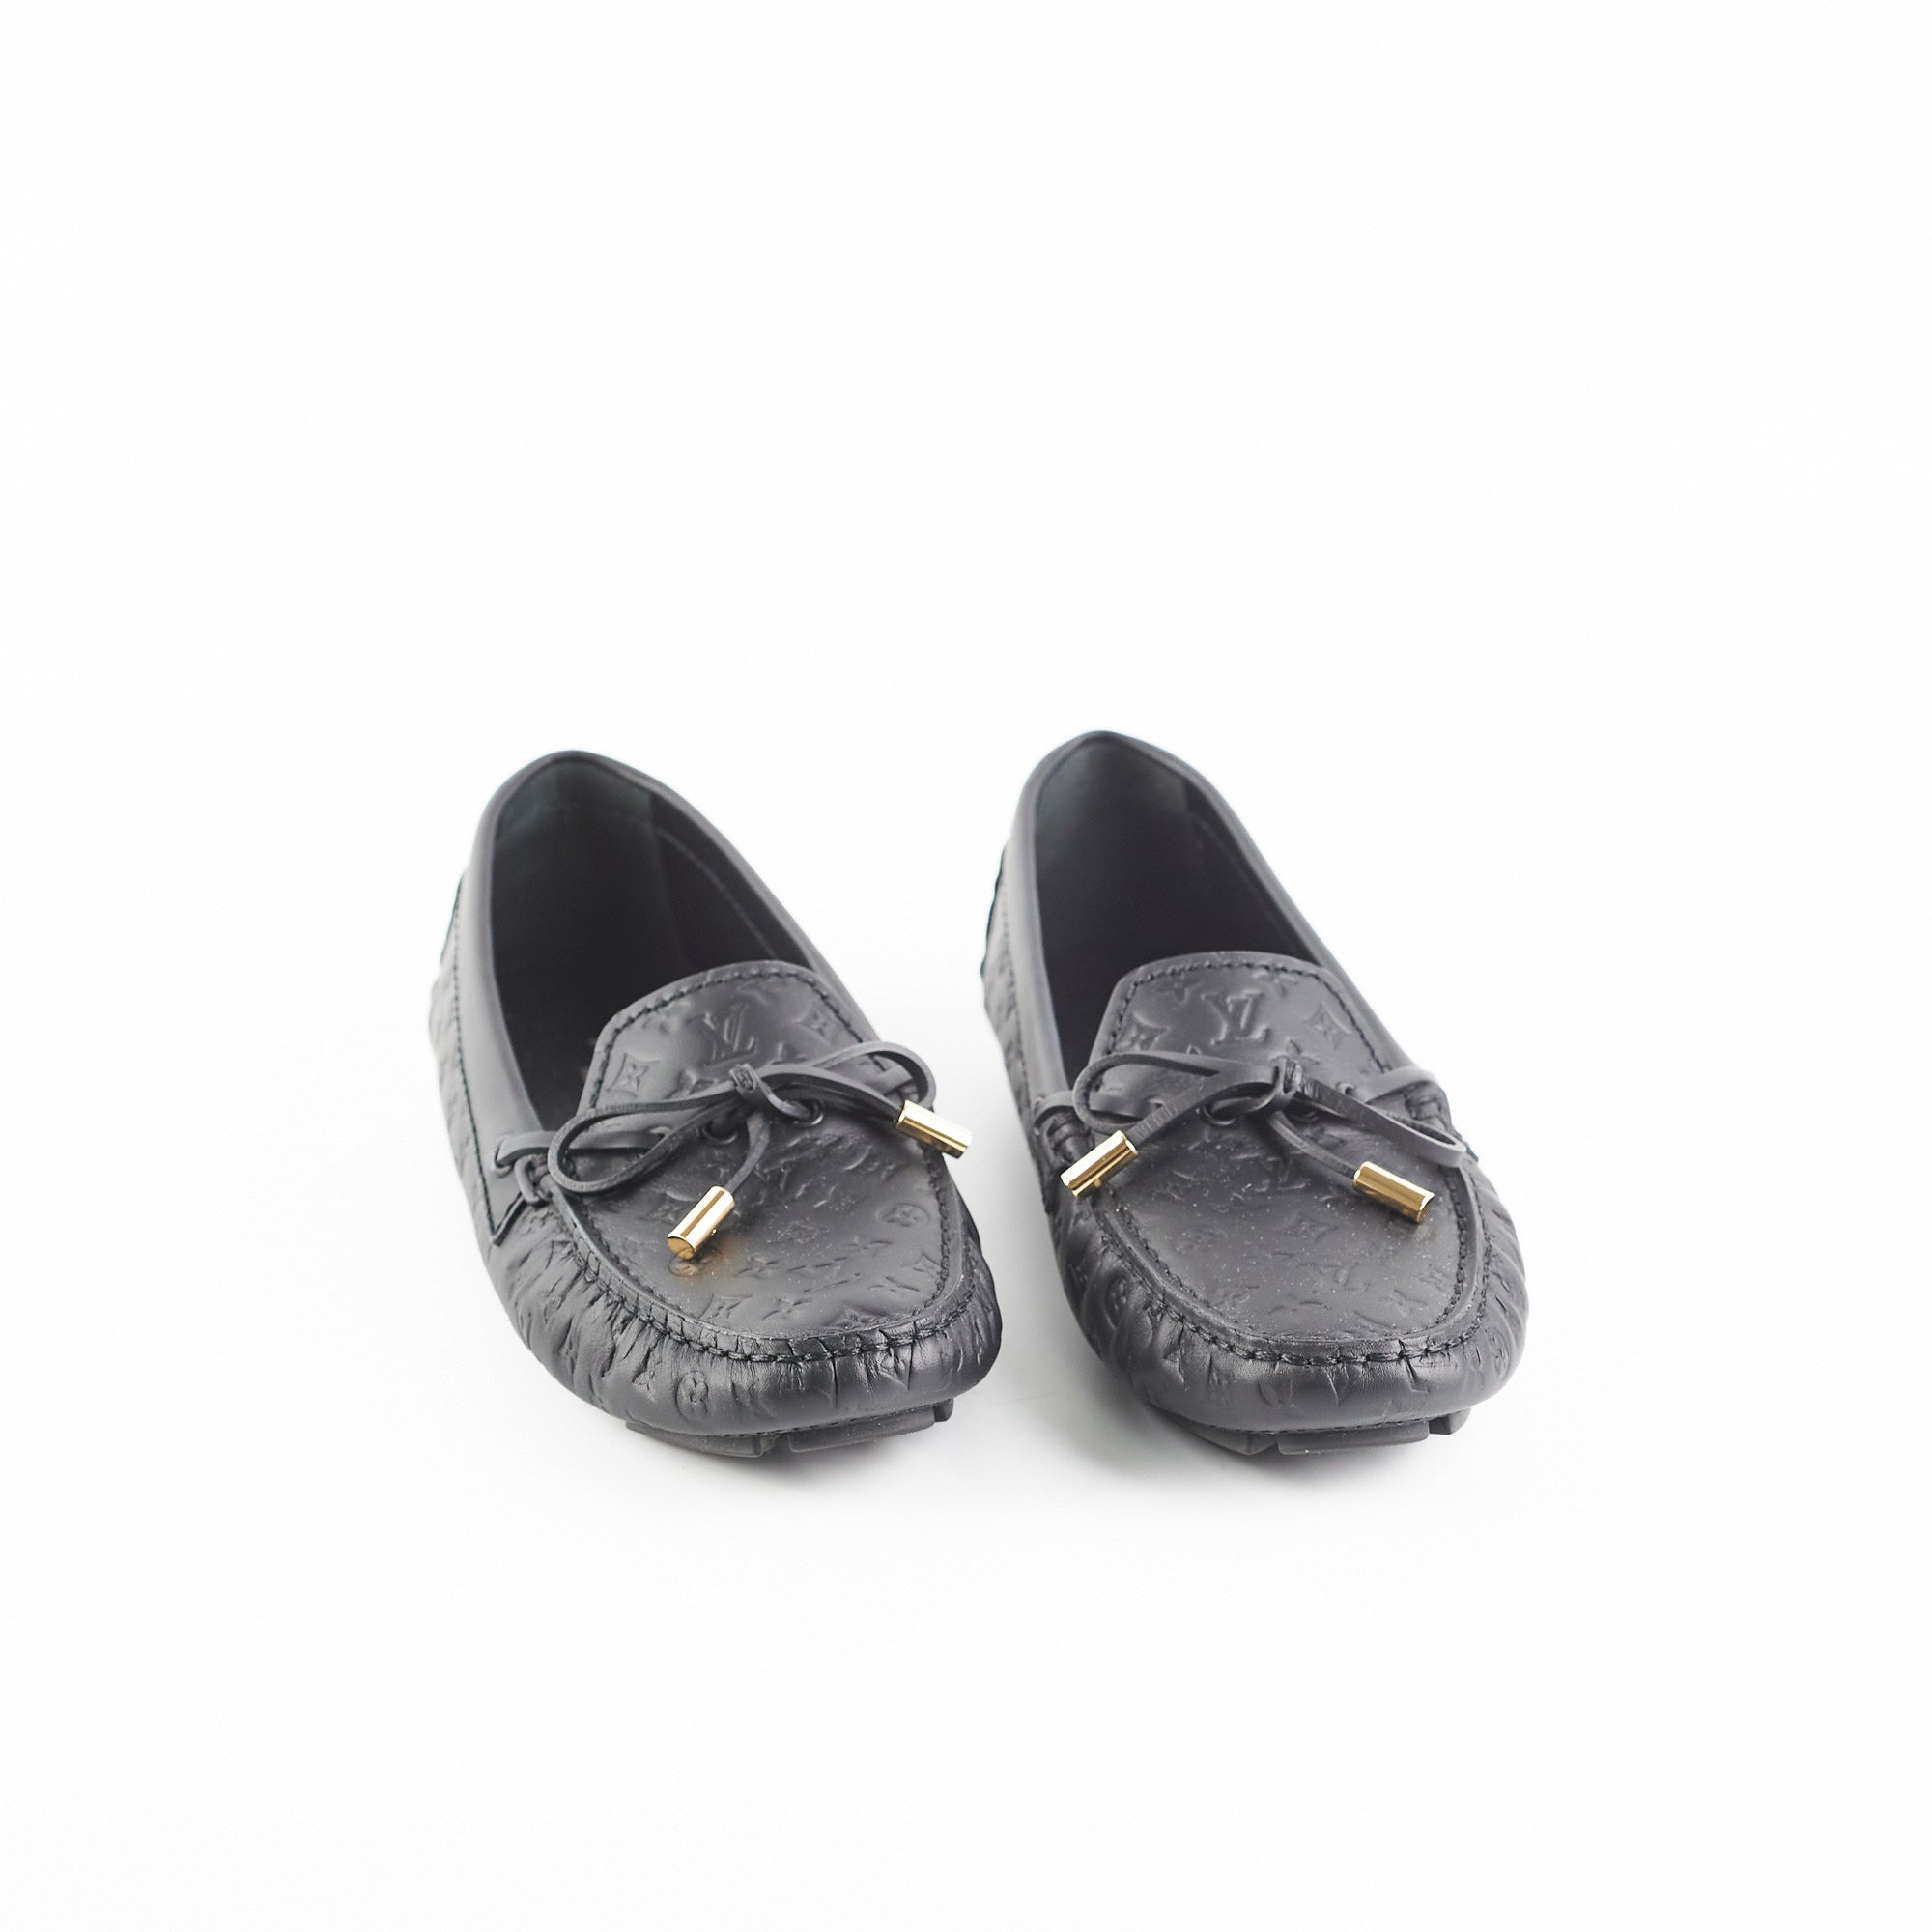 ❤new arrival❤ Name: Gloria Flat Loafers Black (Size 38) . SKU 15485 . Price:  $1150 AUD / $820 USD Price for payment via Paypal Friends…